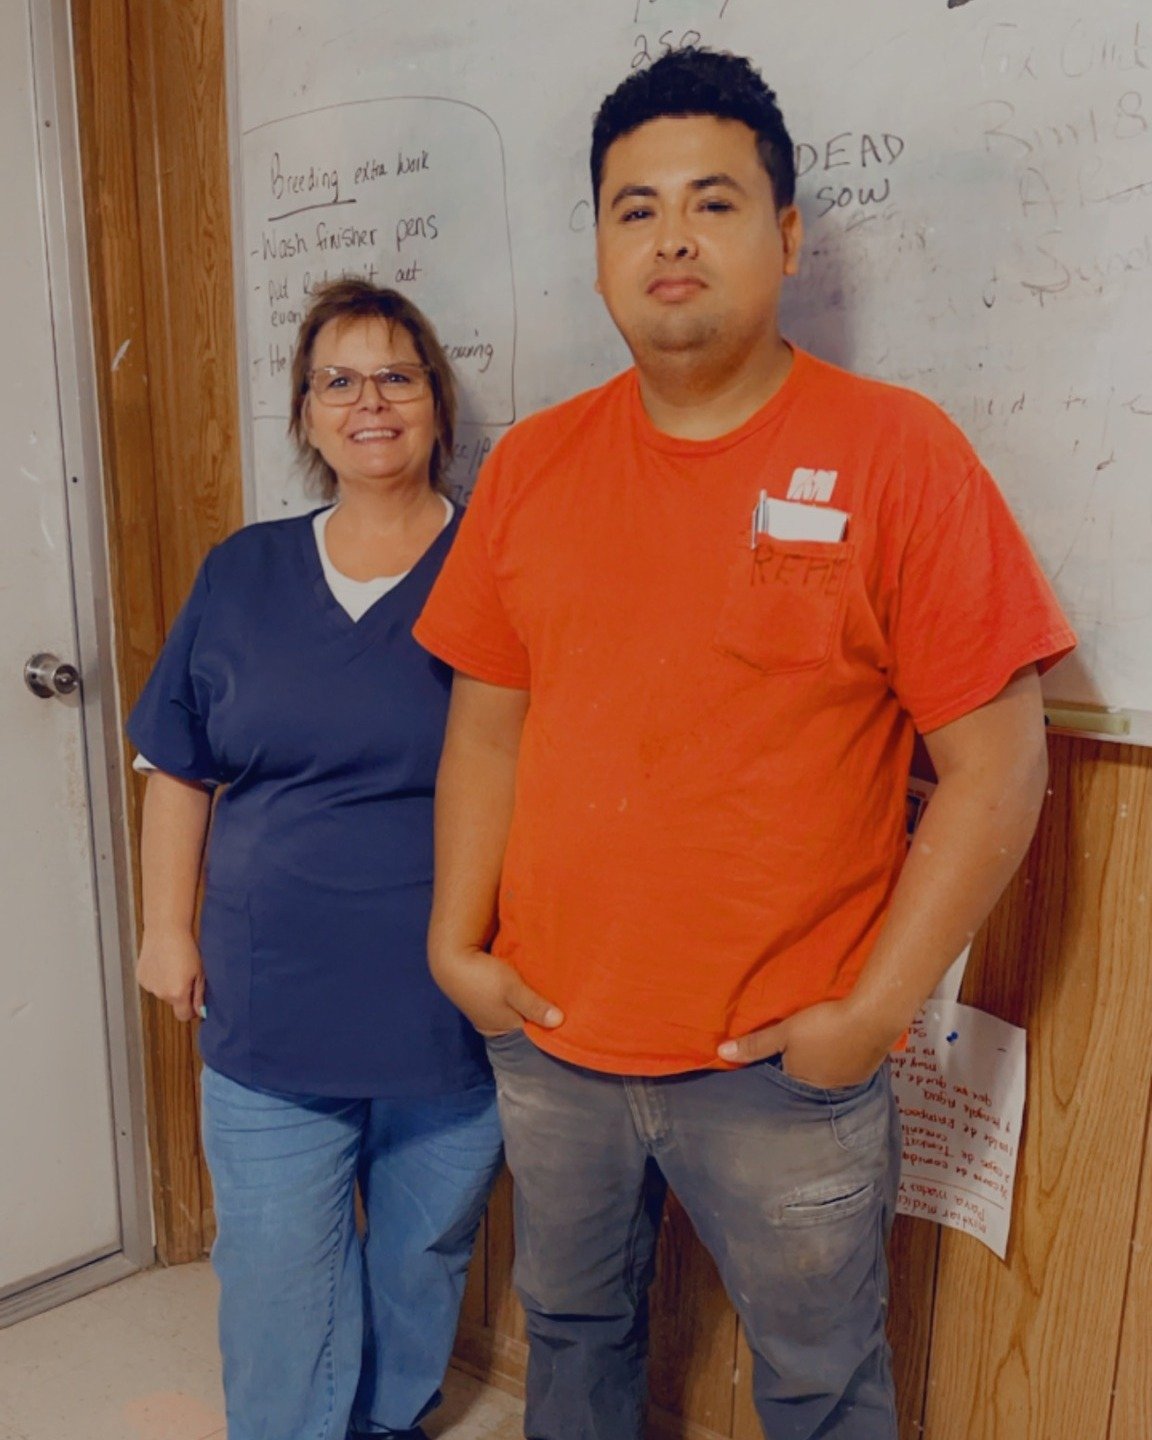 Congratulations to Rene Eustacia Luna from Taylor Bridge Sow Farm on being with MFV for 15 years! Pictured with Rene is Taylor Bridge Farm Manager Jane Munoz. 🎉